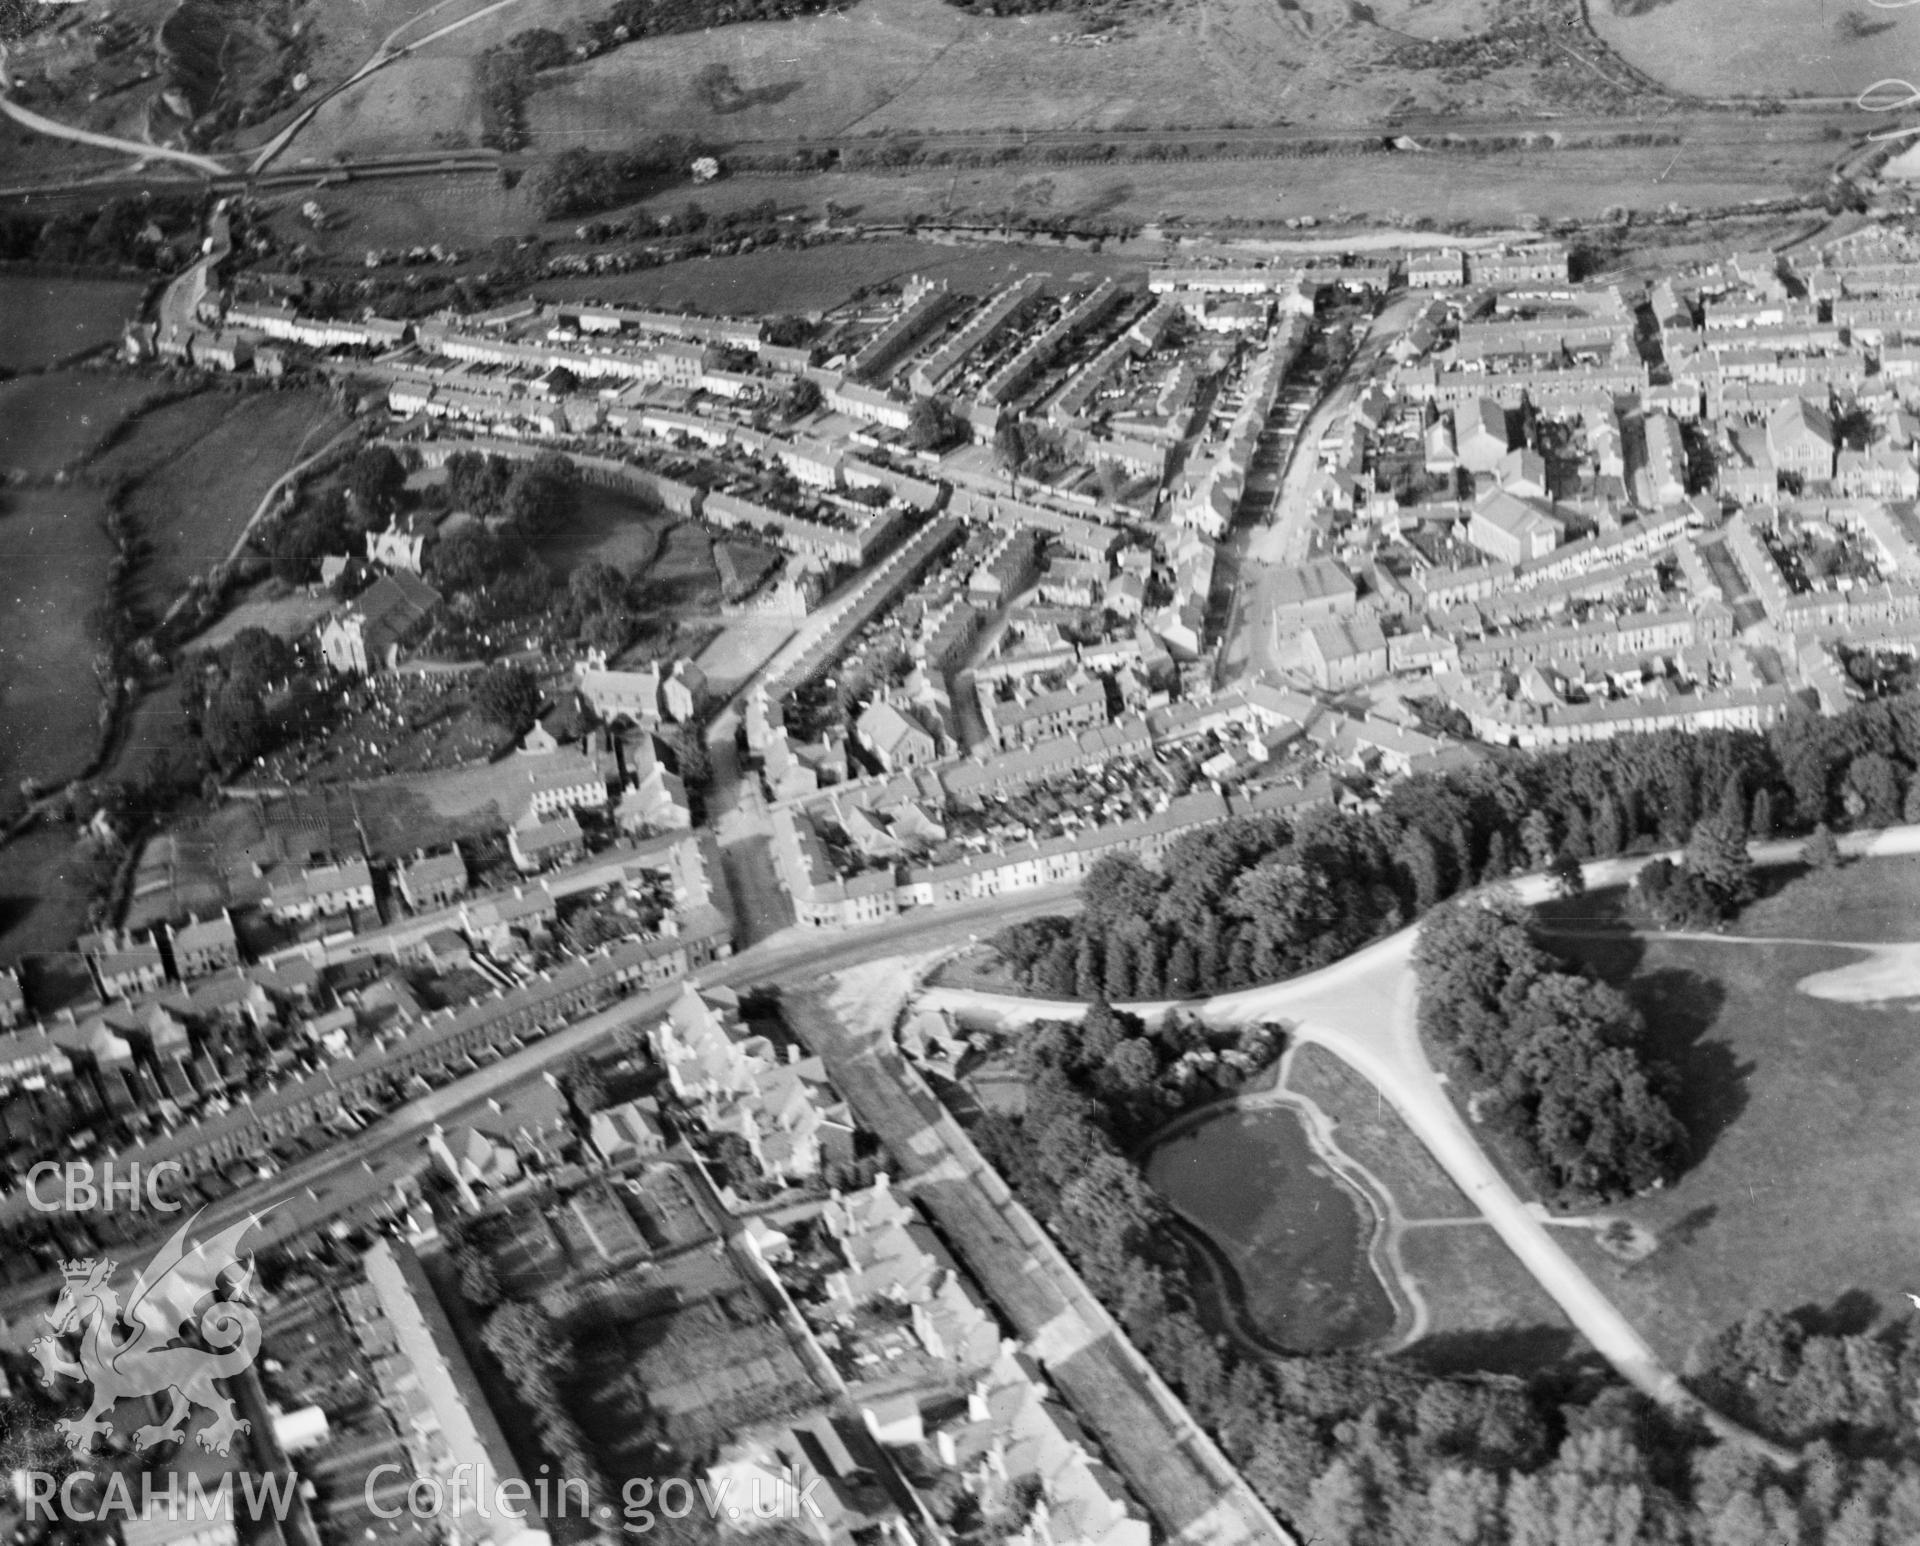 General view of Aberdare, showing park, oblique aerial view. 5?x4? black and white glass plate negative.